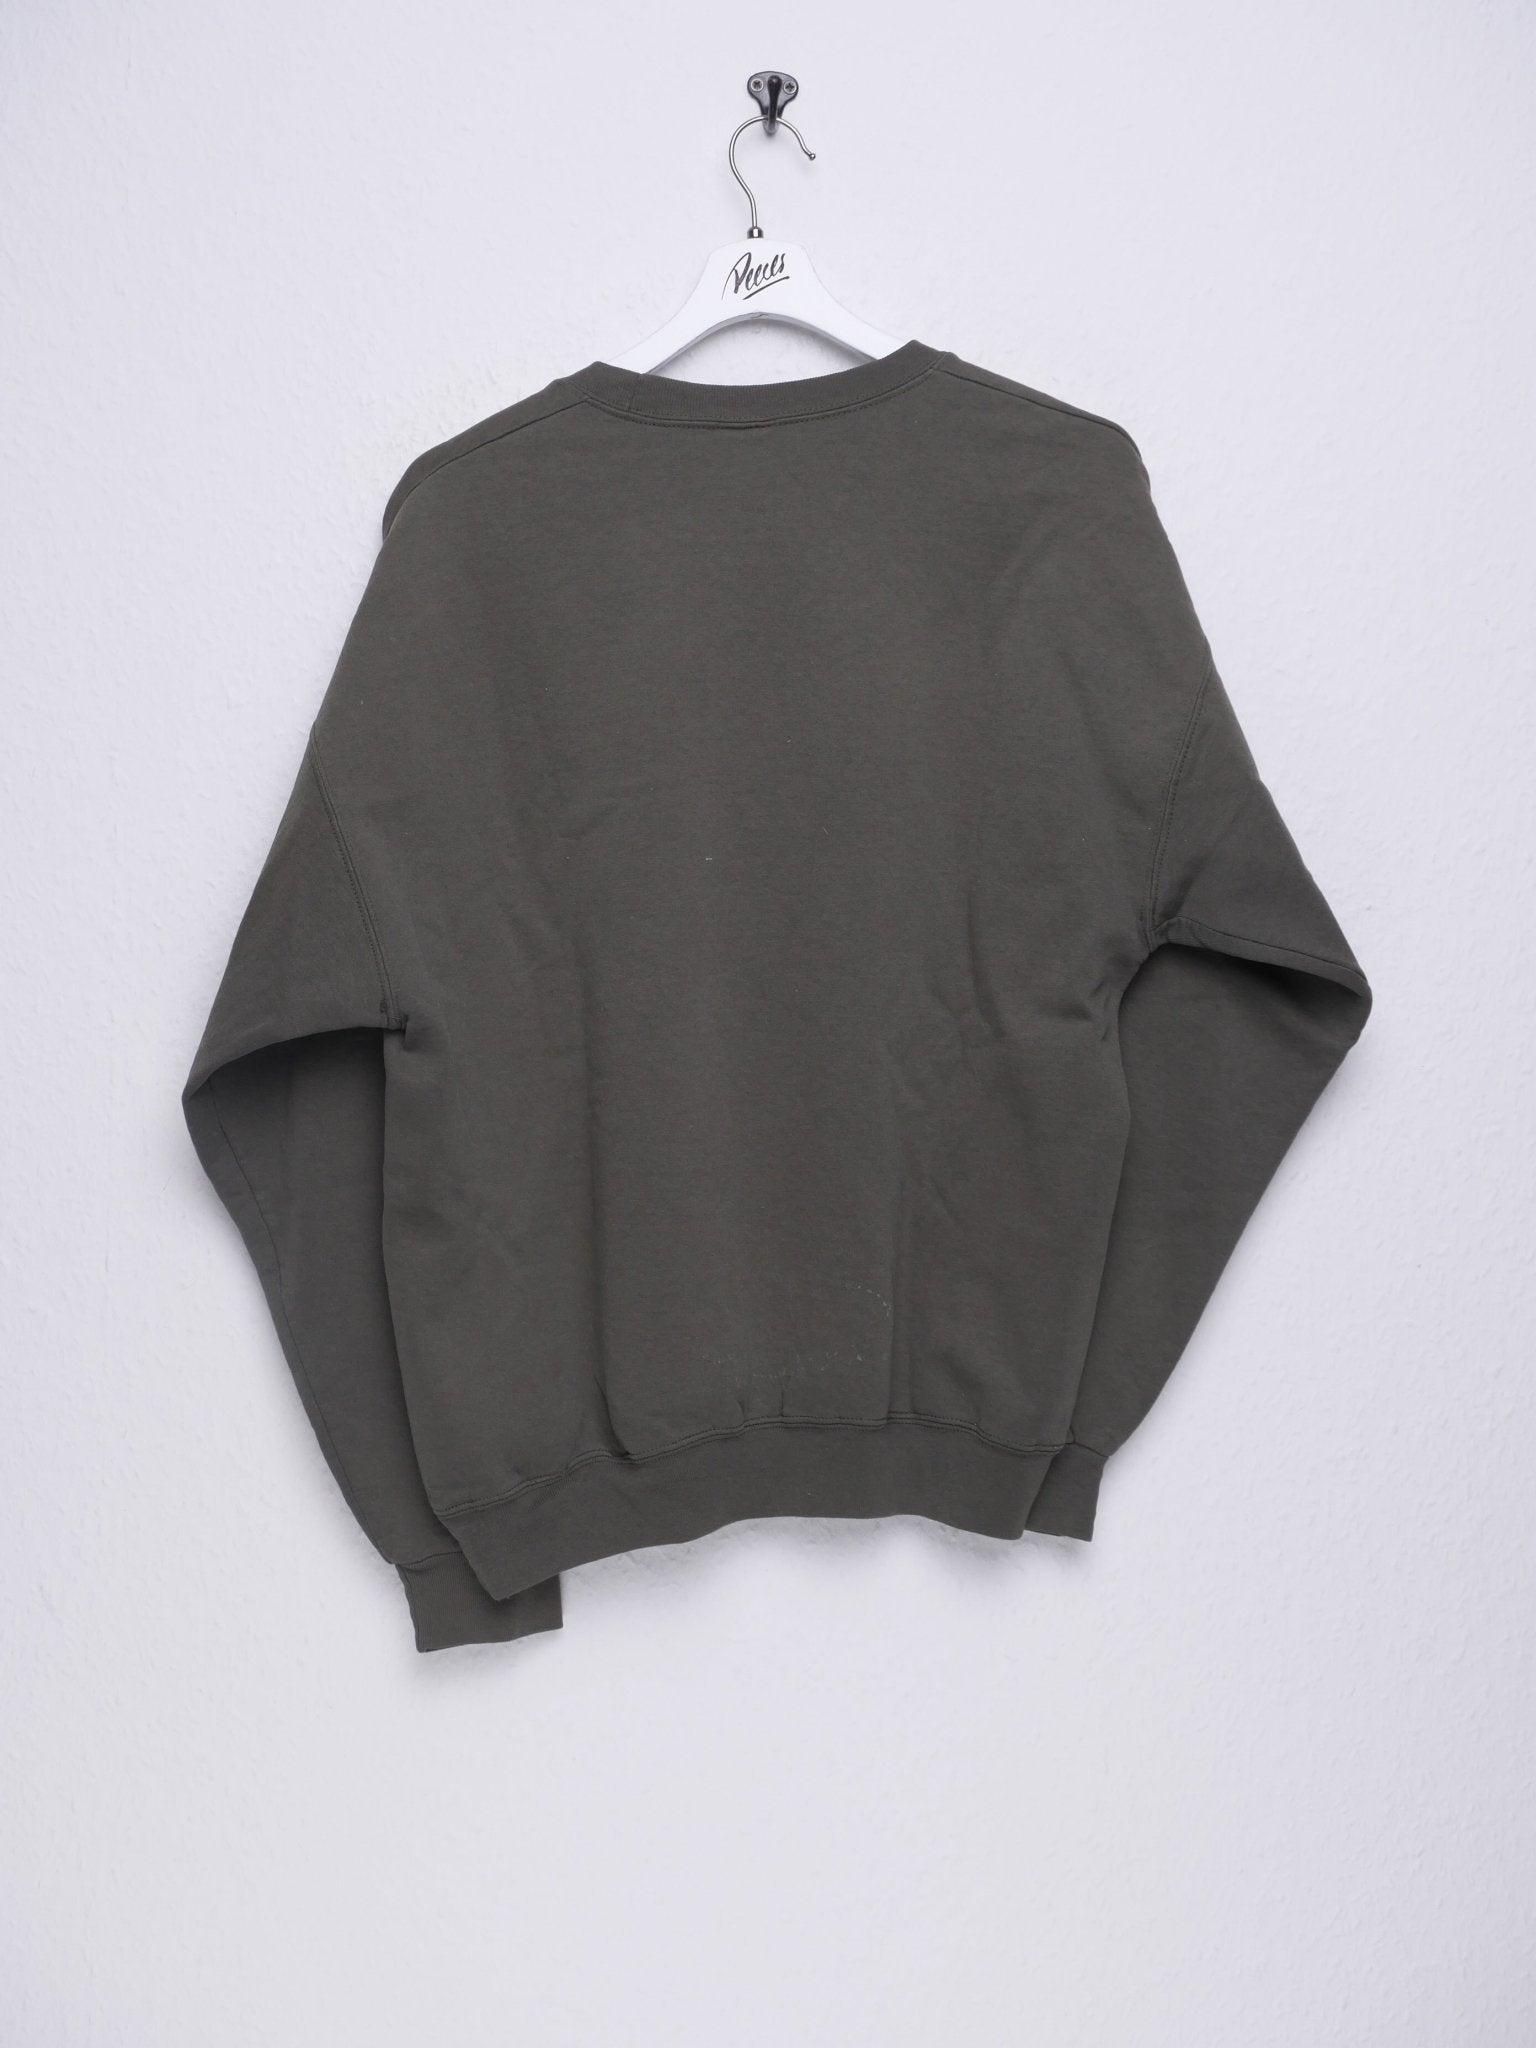 starter embroidered Logo washed green Sweater - Peeces